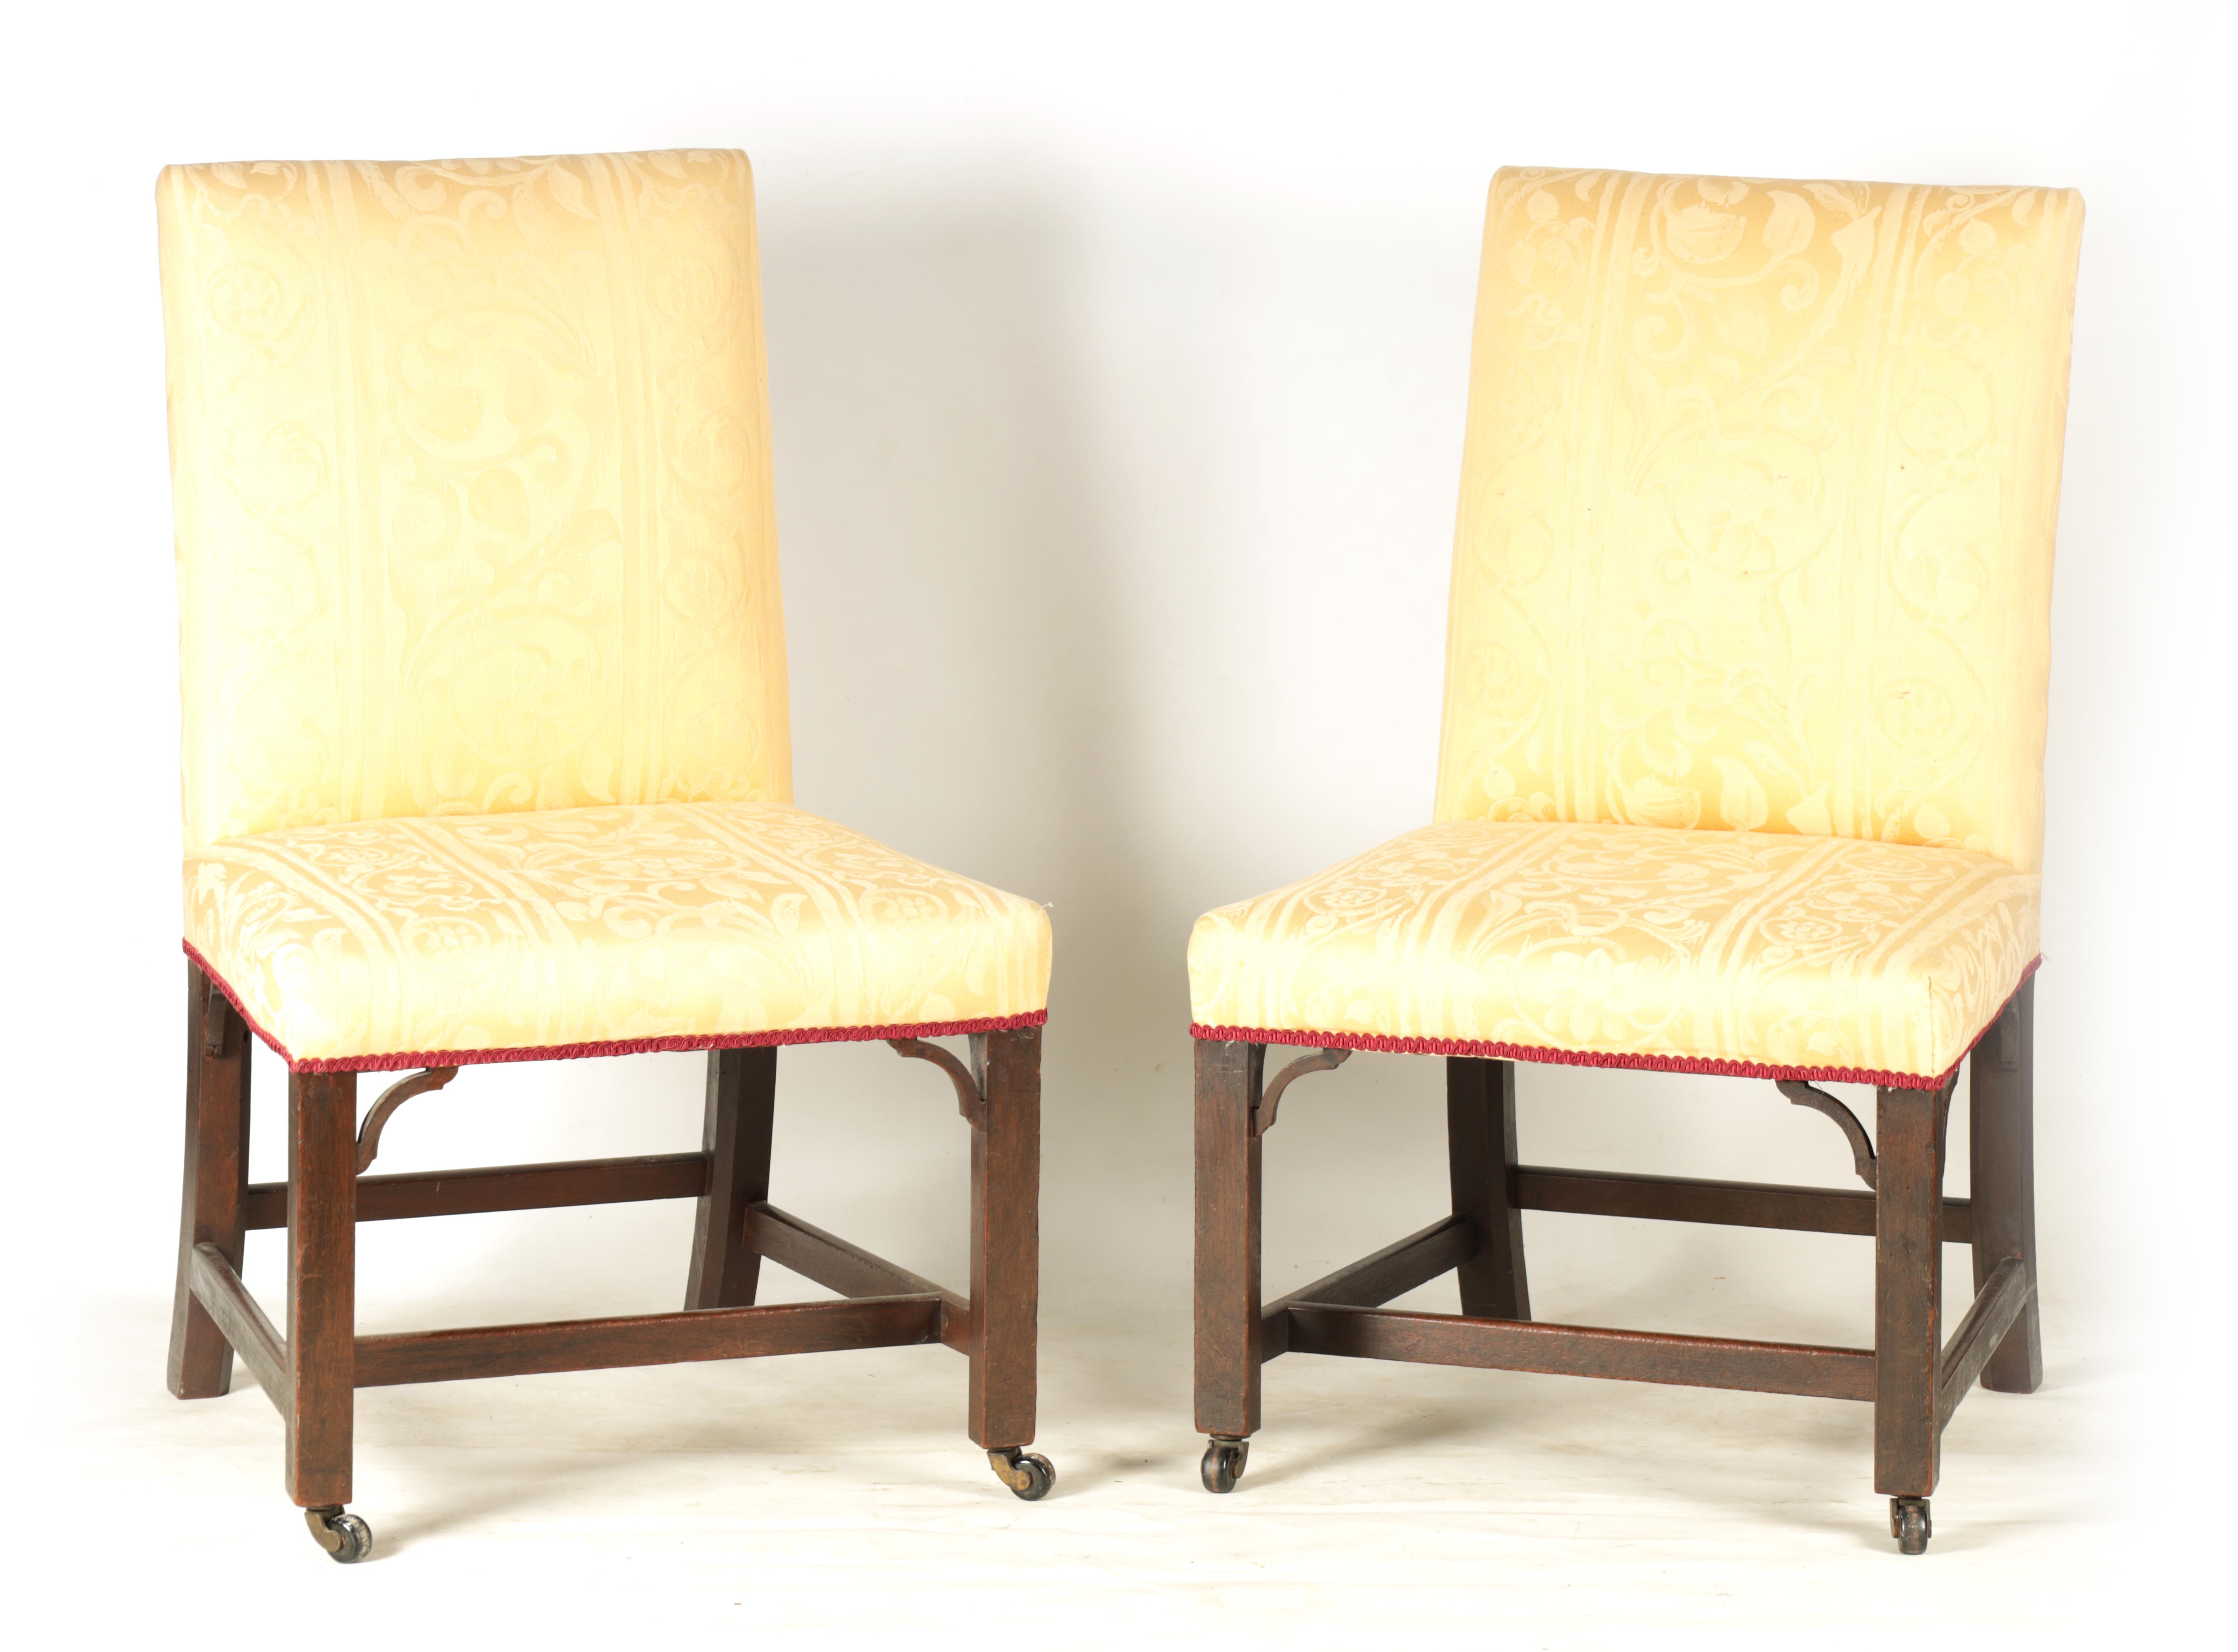 A PAIR OF GEORGE III MAHOGANY CHIPPENDALE STYLE UPHOLSTERED SIDE CHAIRS with square-shaped backs